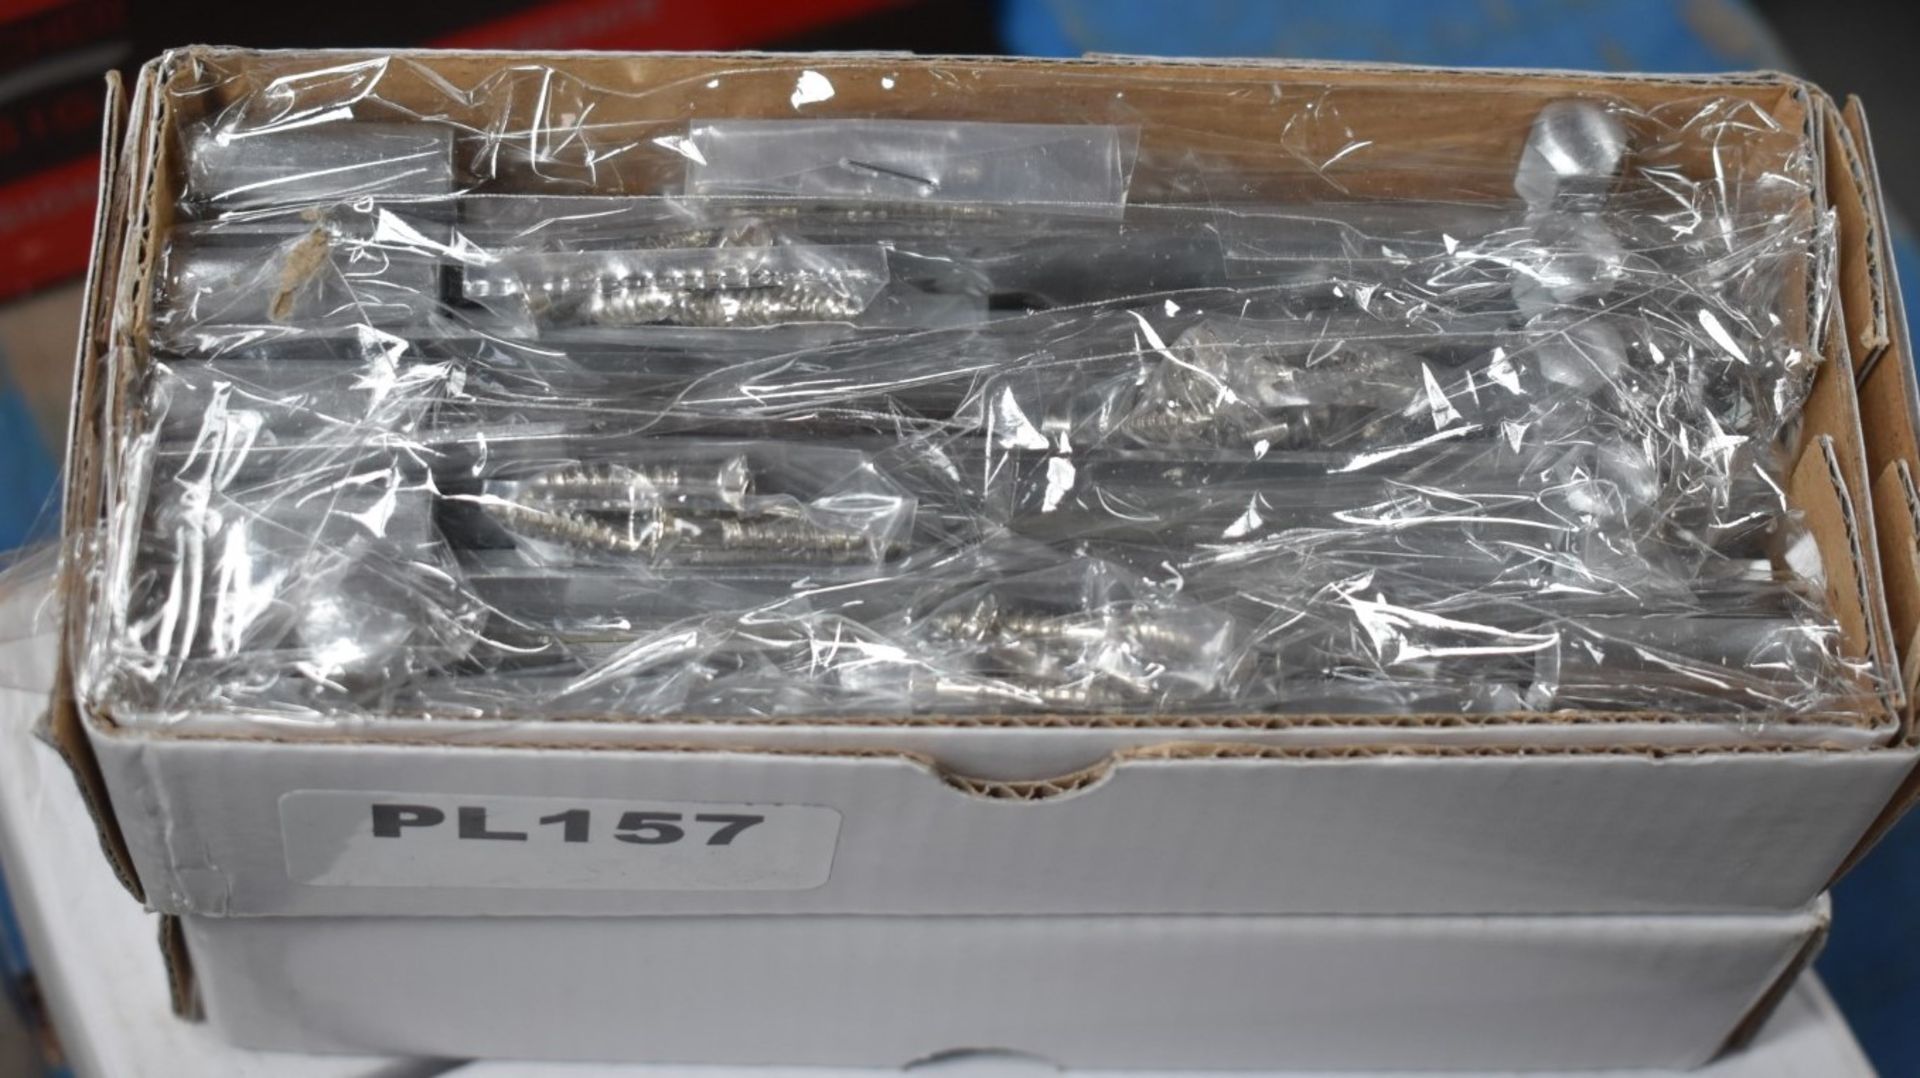 20 x Solid Brass Necked Bolts - Satin Chrome Finish With Screws - Size 6" x 1 1/4" - Brand New Stock - Image 4 of 4